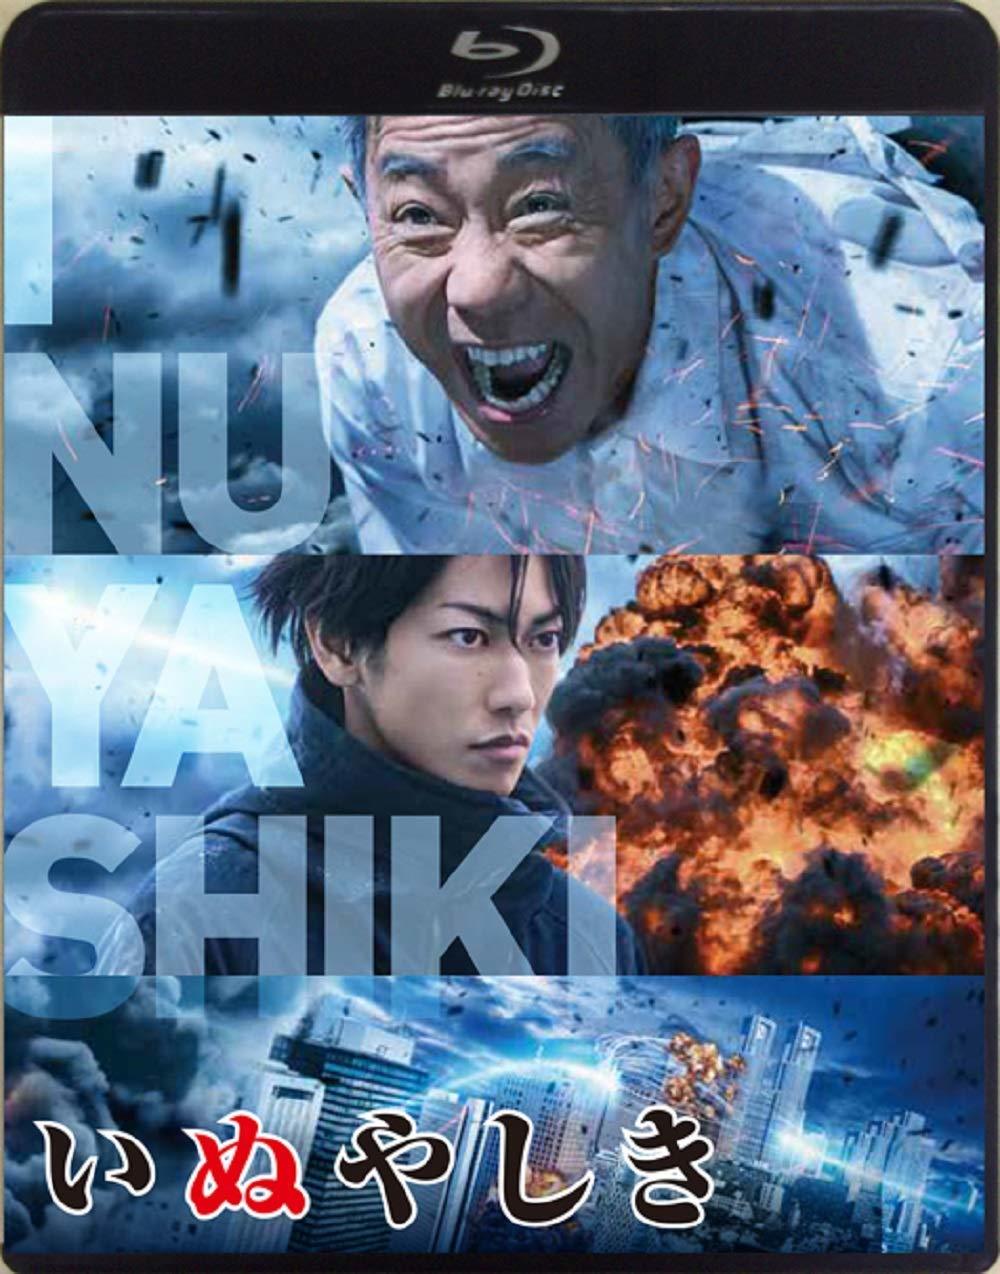 INUYASHIKI - COMPLETE TV SERIES+LIVE ACTION MOVIE JAPANESE ANIME WITH  SUBTITLED